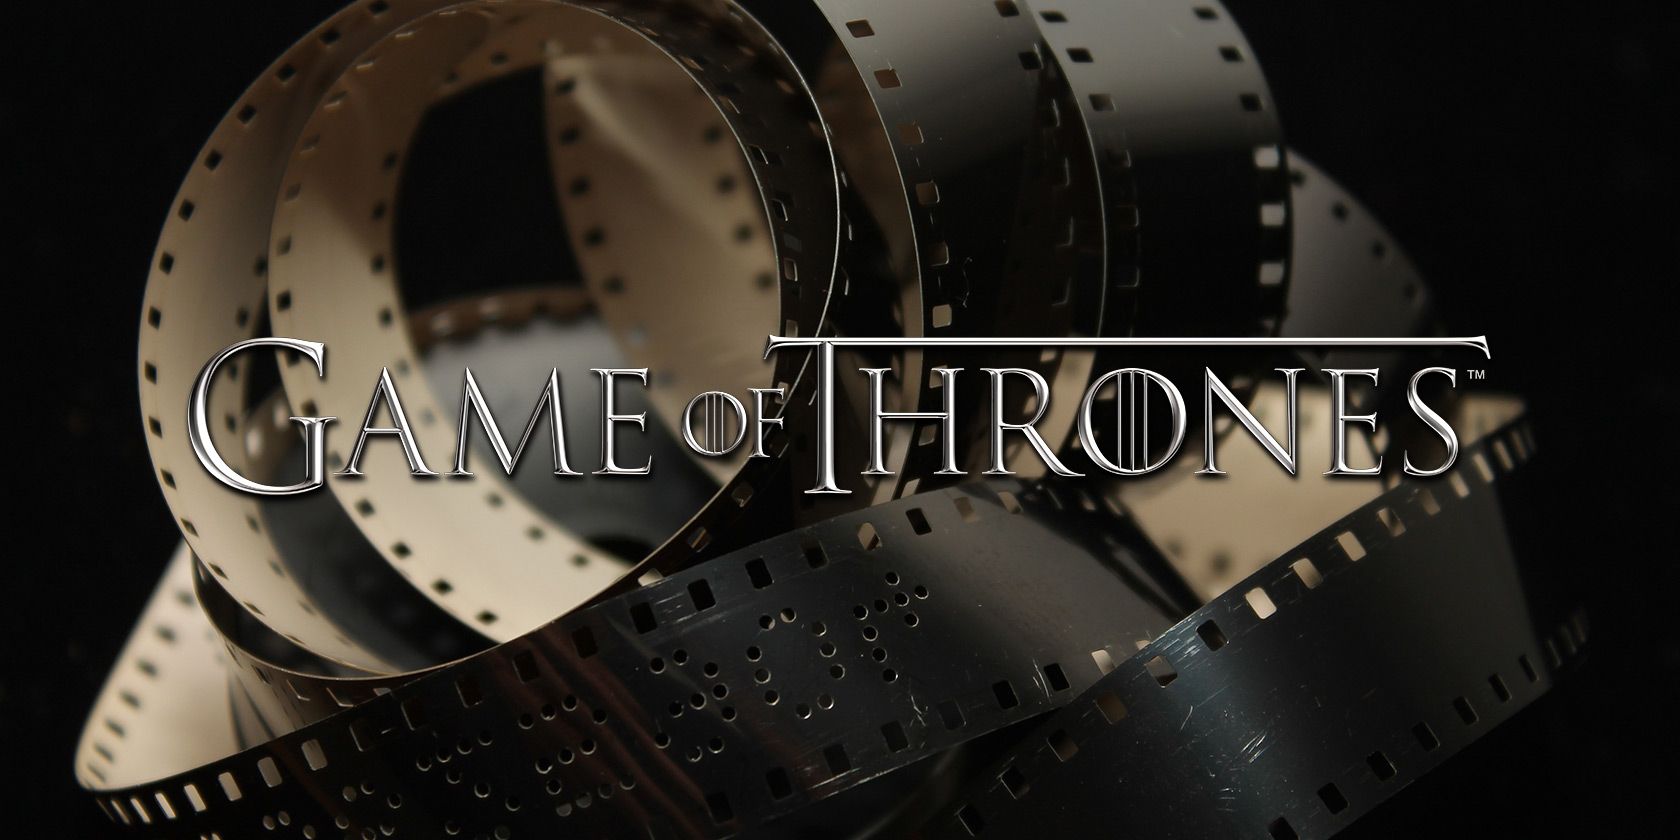 Youtube Explains The Real History Behind Game Of Thrones